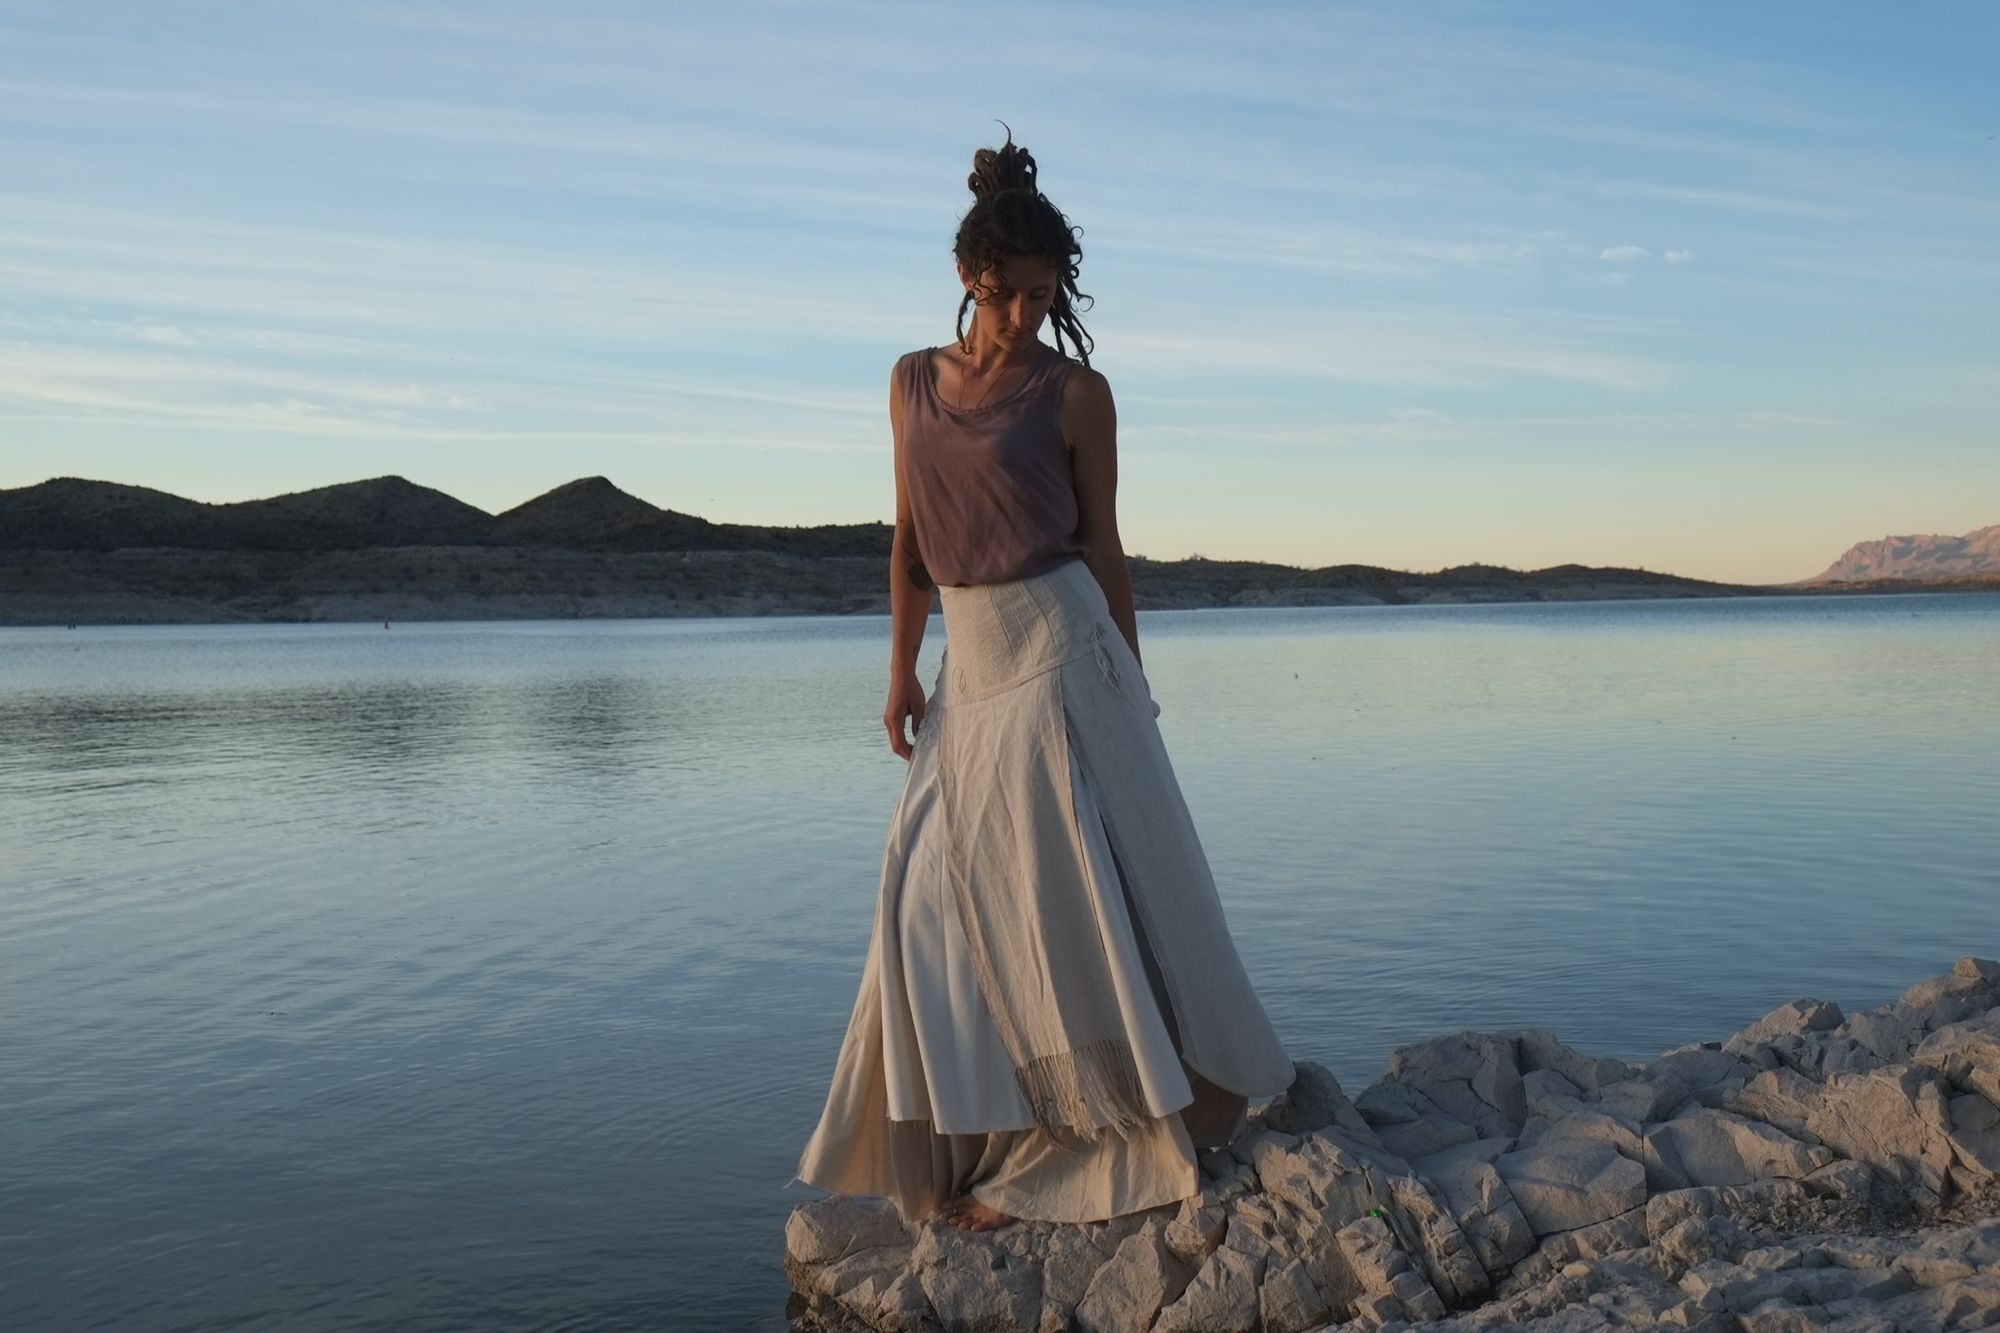 woman wearing white wedding skirt and lilac shirt by a still lake at sunset